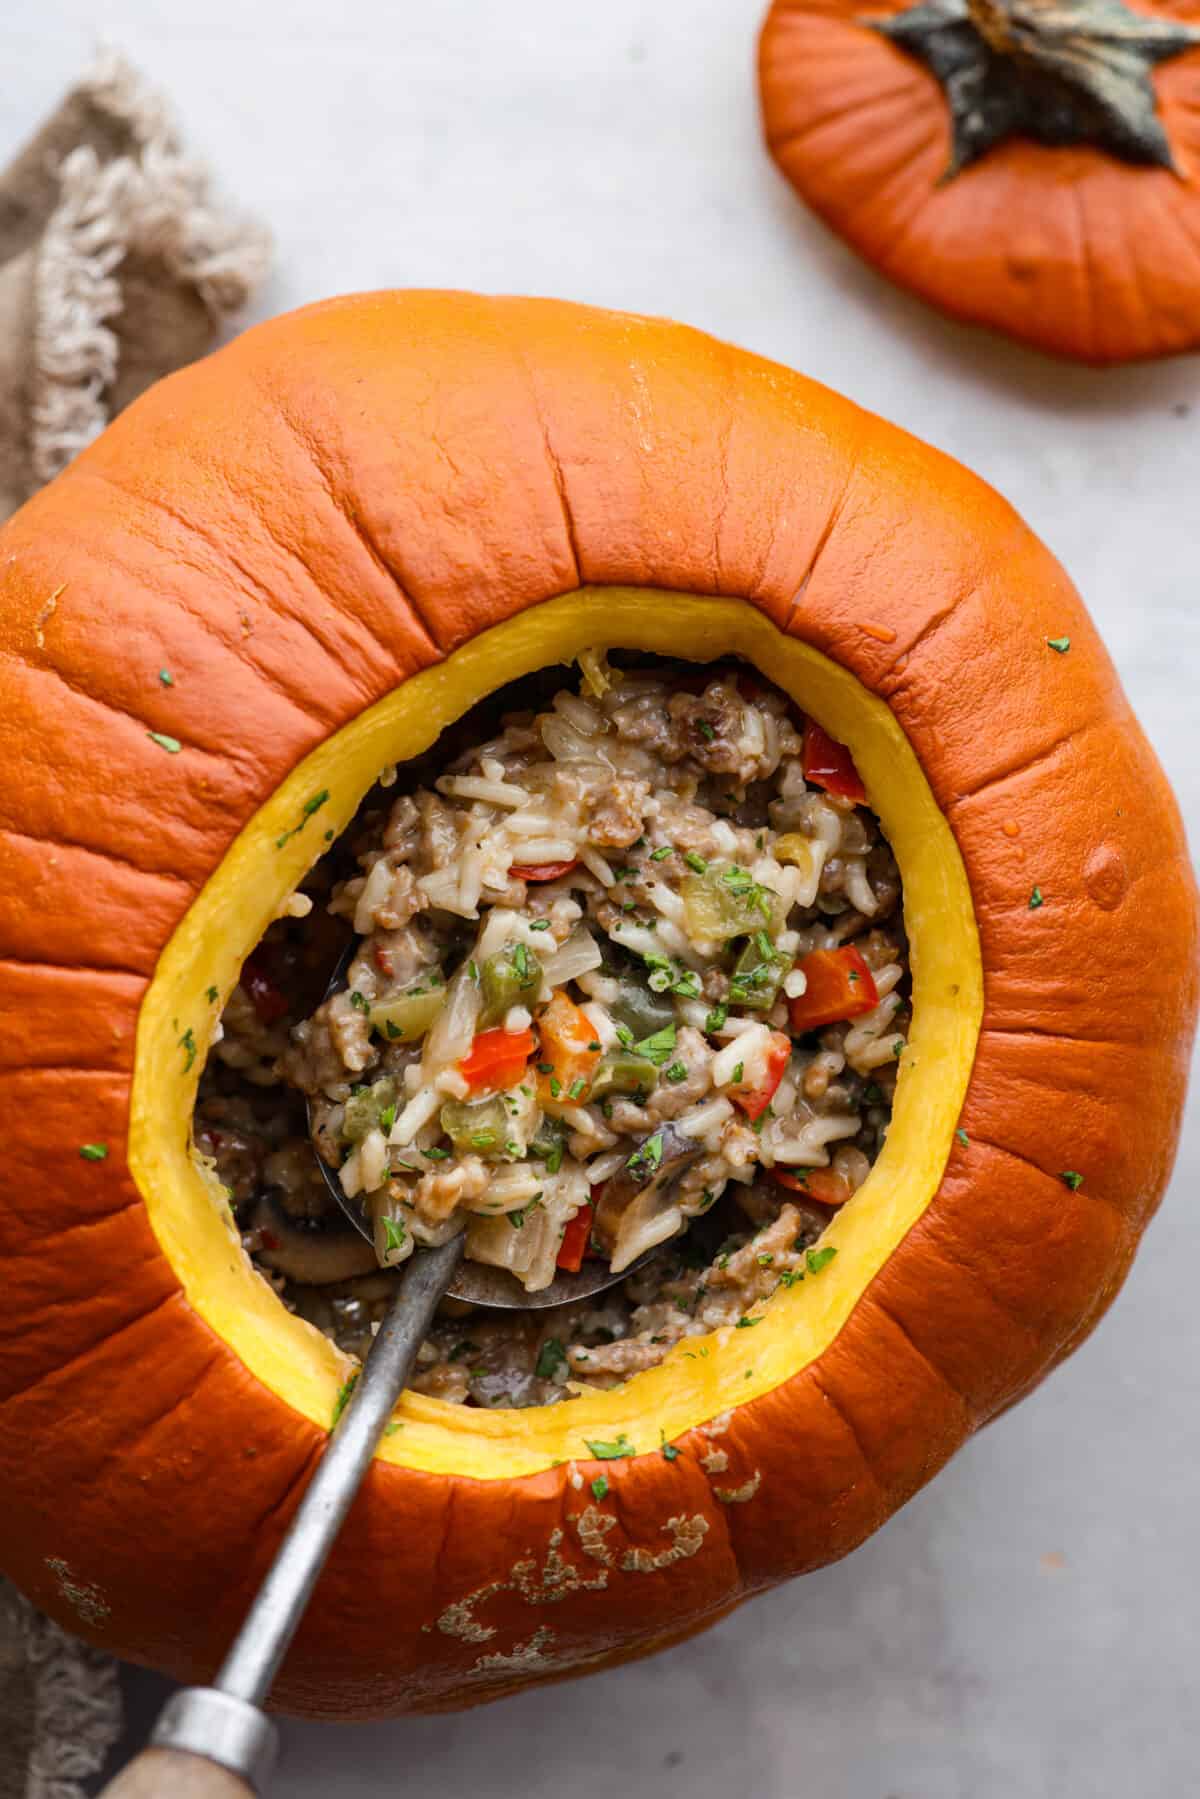 Top-down view of a pumpkin that has been hollowed out and filled with sausage, rice, and vegetables.